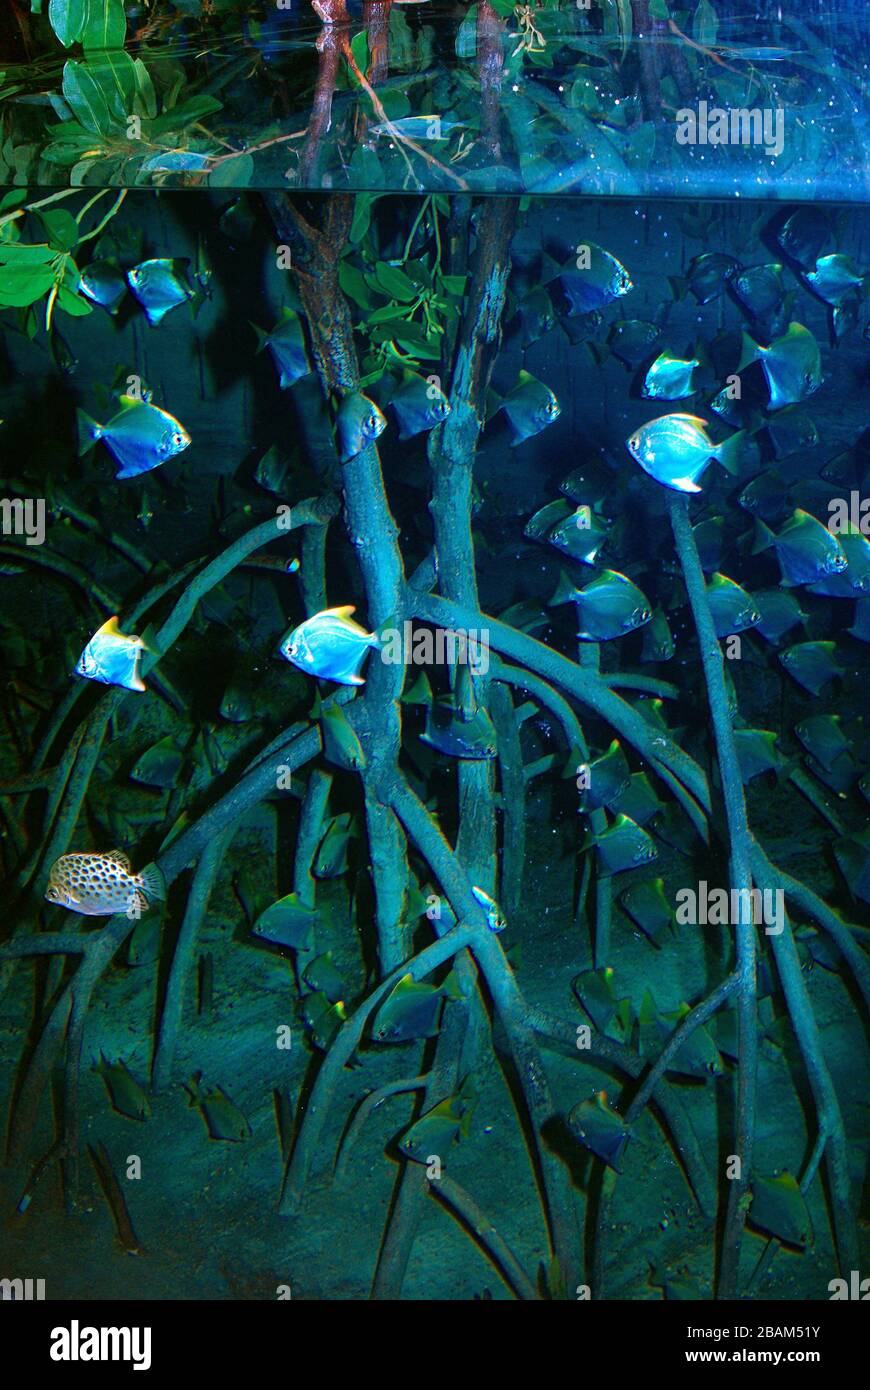 Brackish water tropical aquarium with mangrove roots and Silver moonyfishes (Monodactylus argenteus) and Scats (Scatophagus argus) Stock Photo